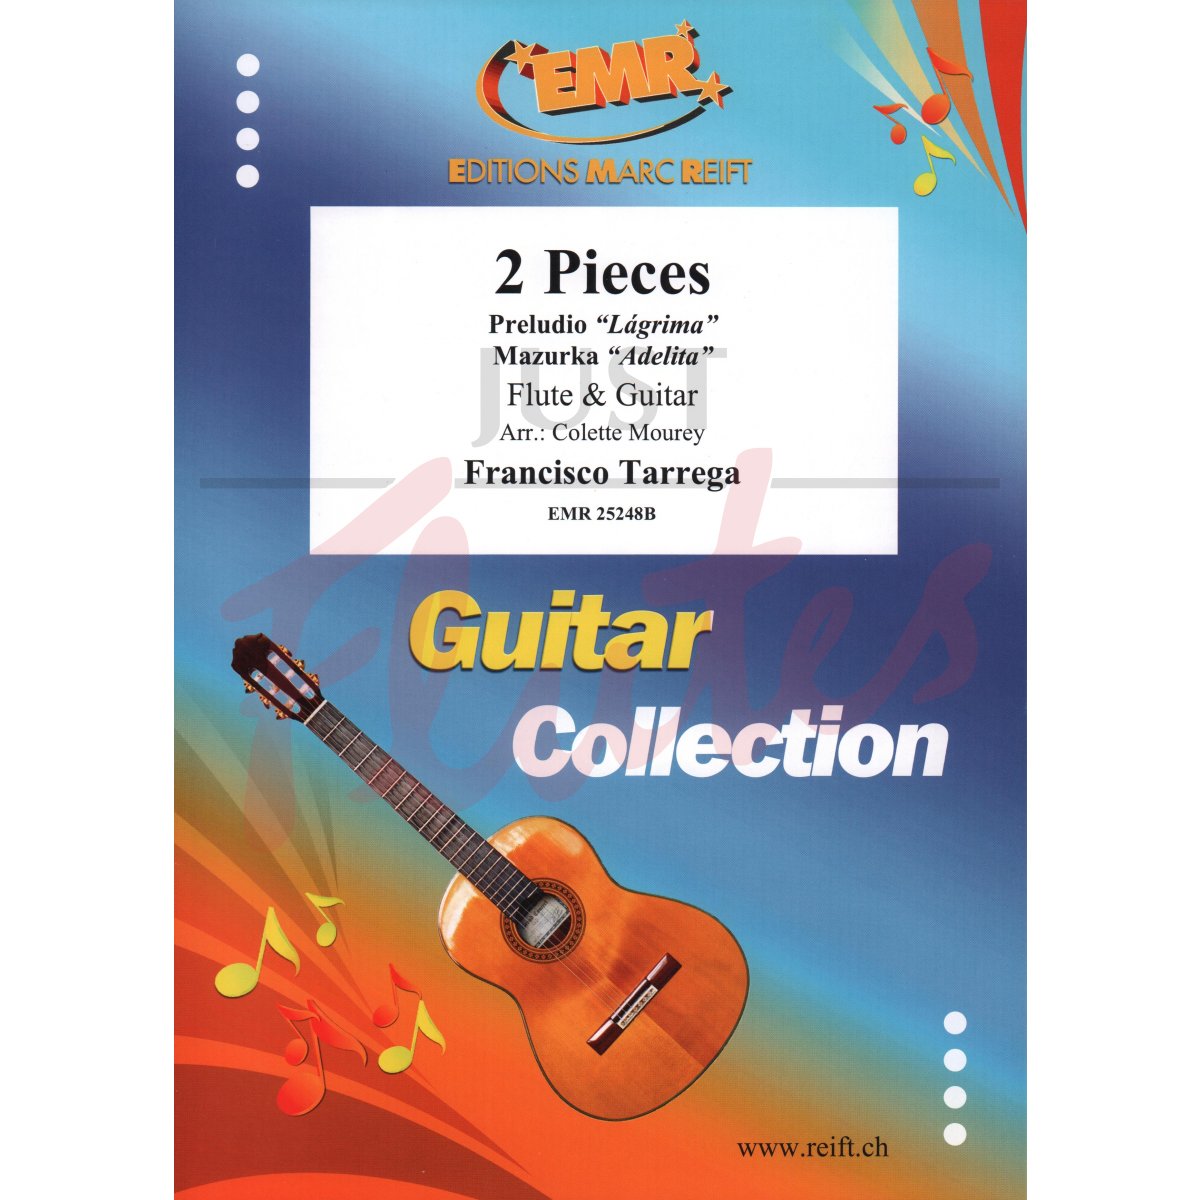 2 Pieces for Flute and Guitar